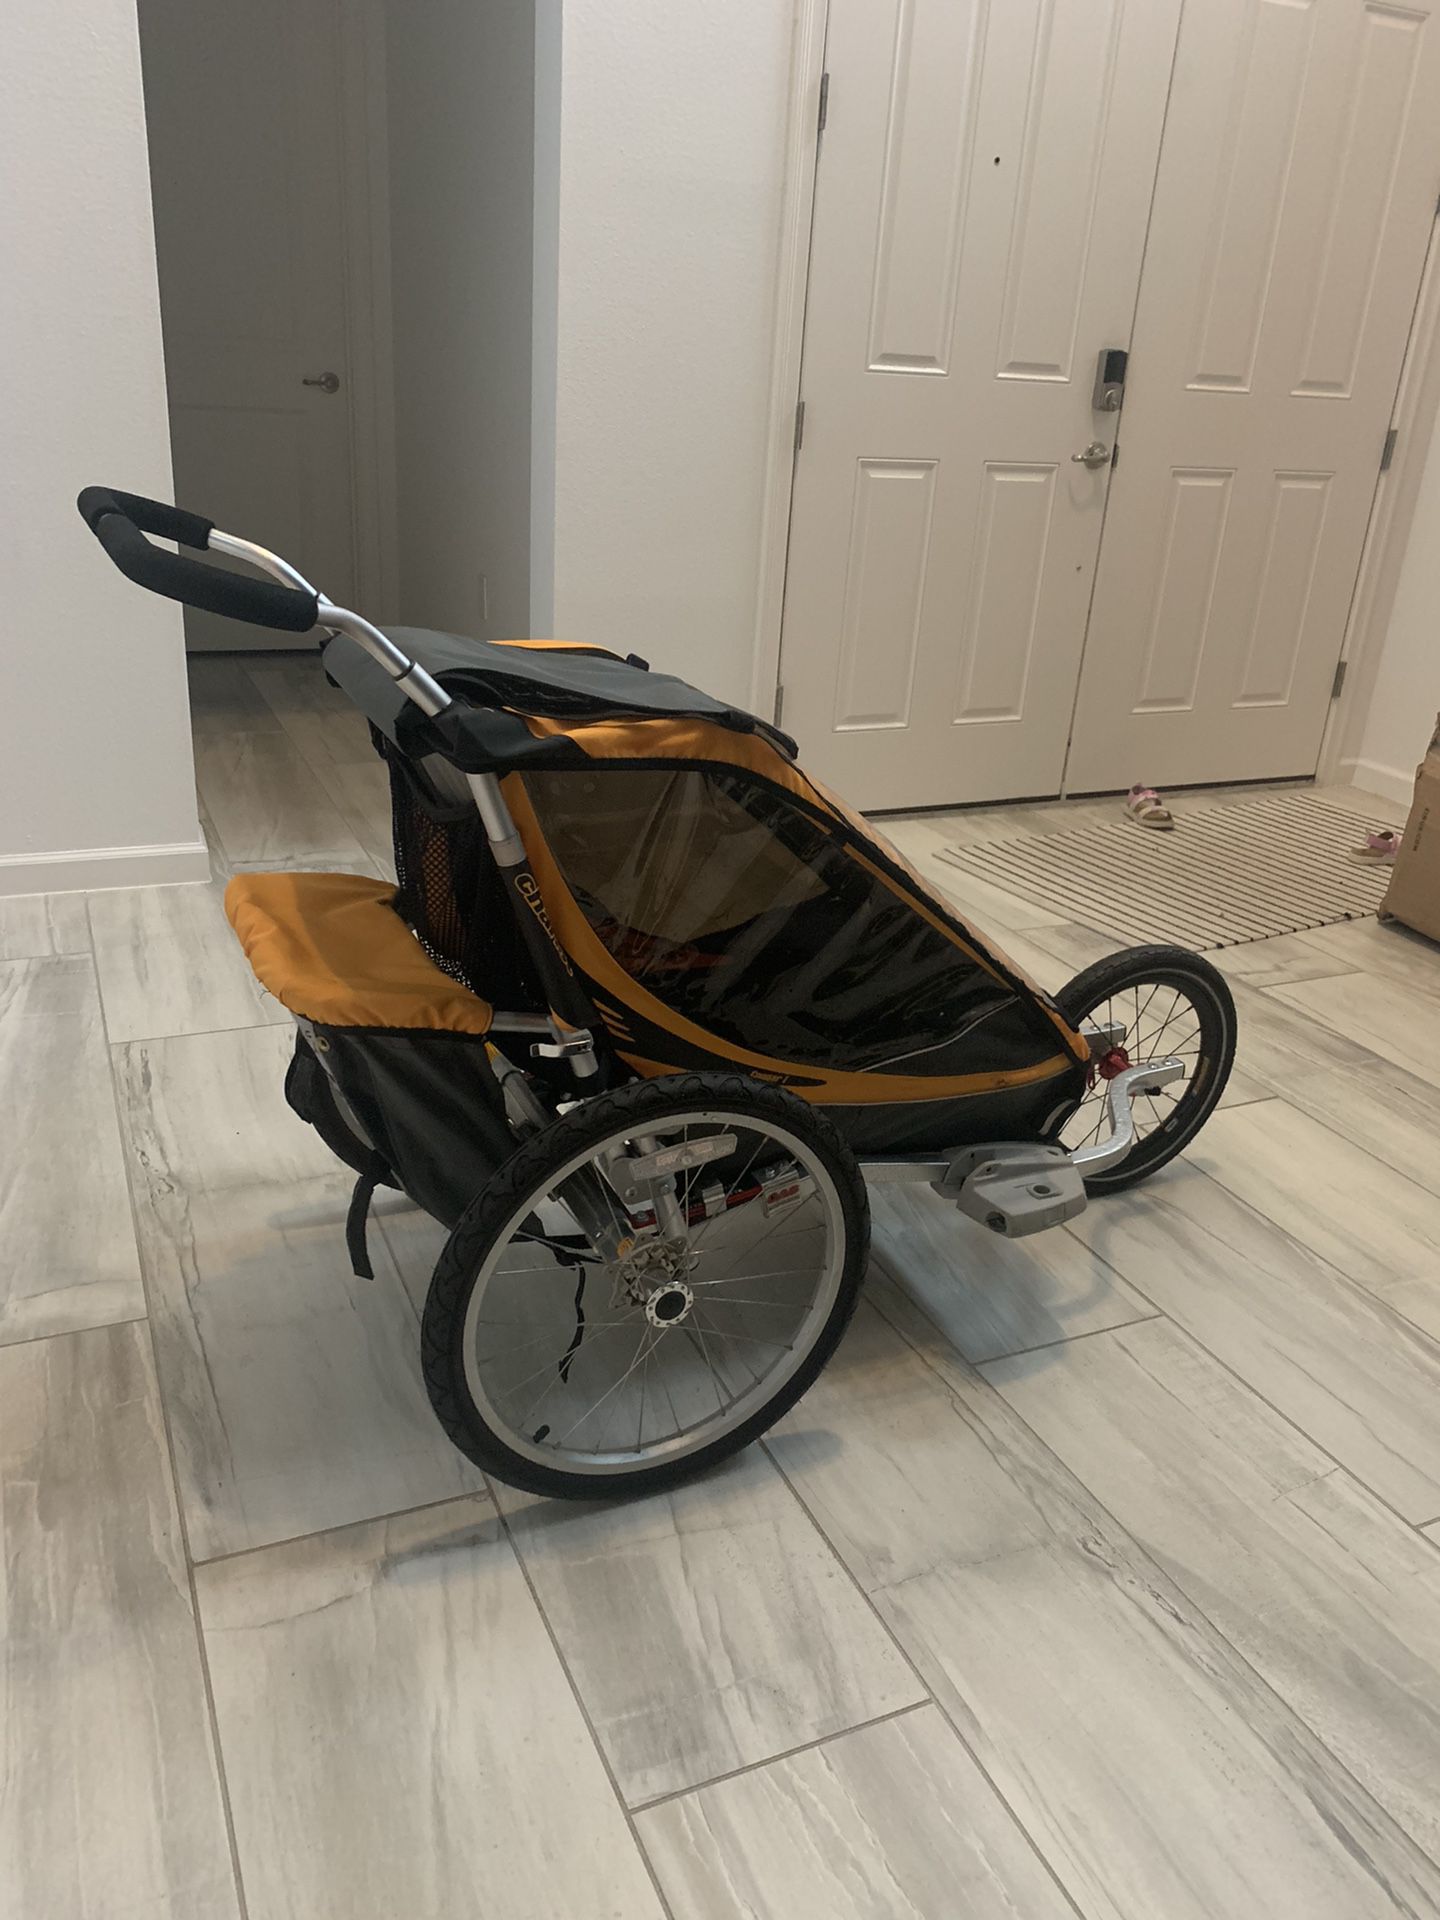  Chariot Bike Trailer For Sale In Excellent Conditions.  Single Rider And Holds Up To 75 Lbs. Only Missing The Hitch But Comes With 